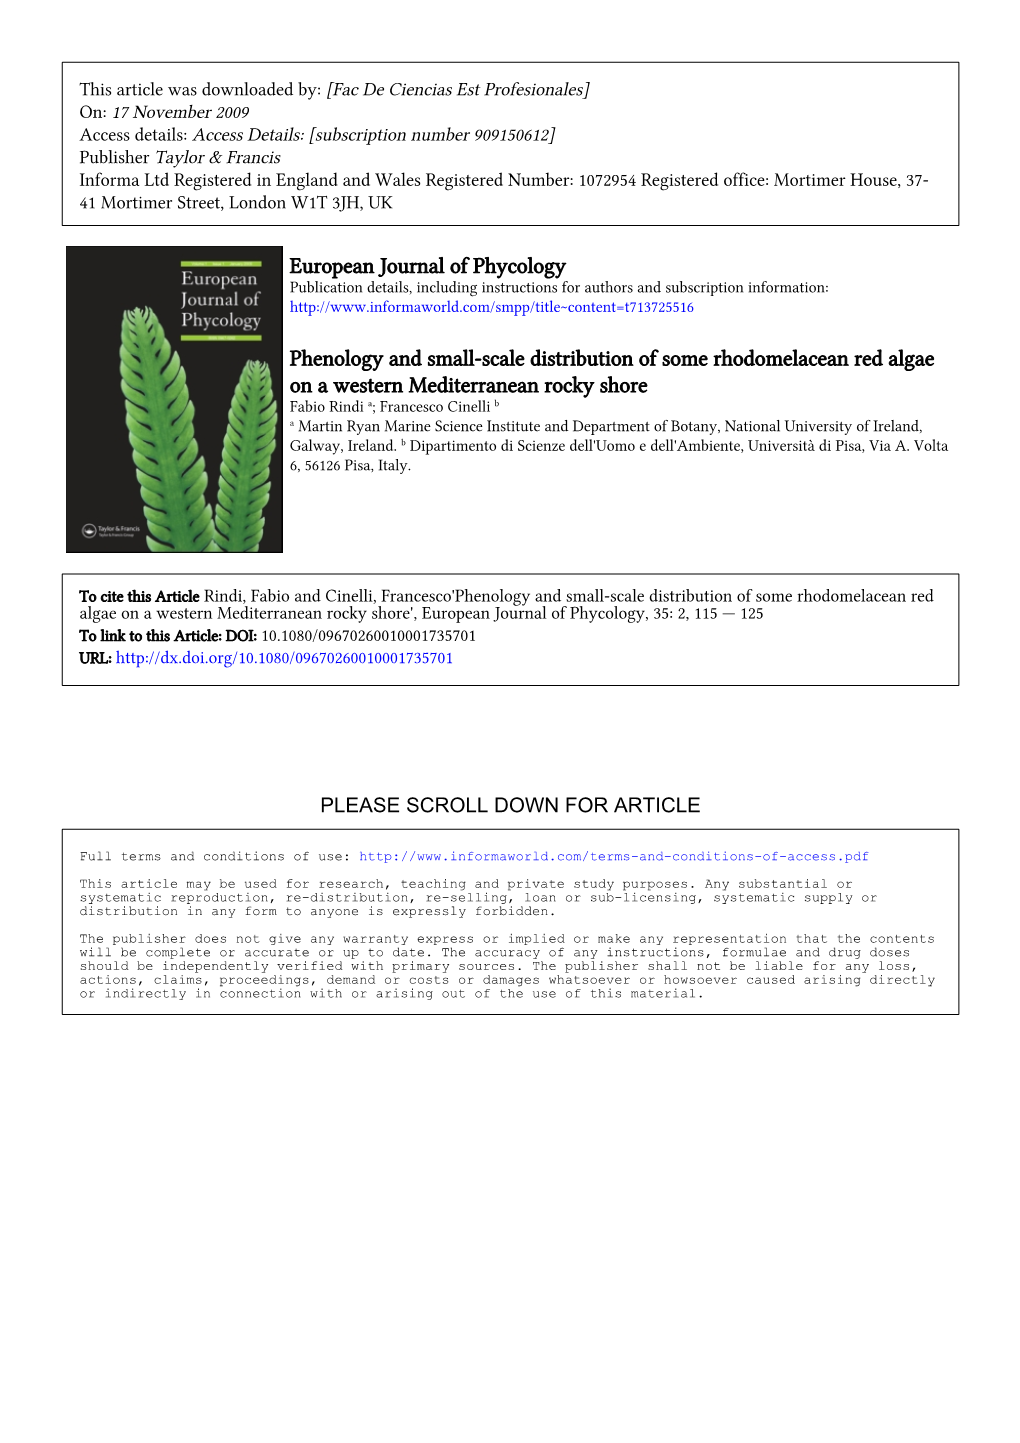 European Journal of Phycology Phenology and Small-Scale